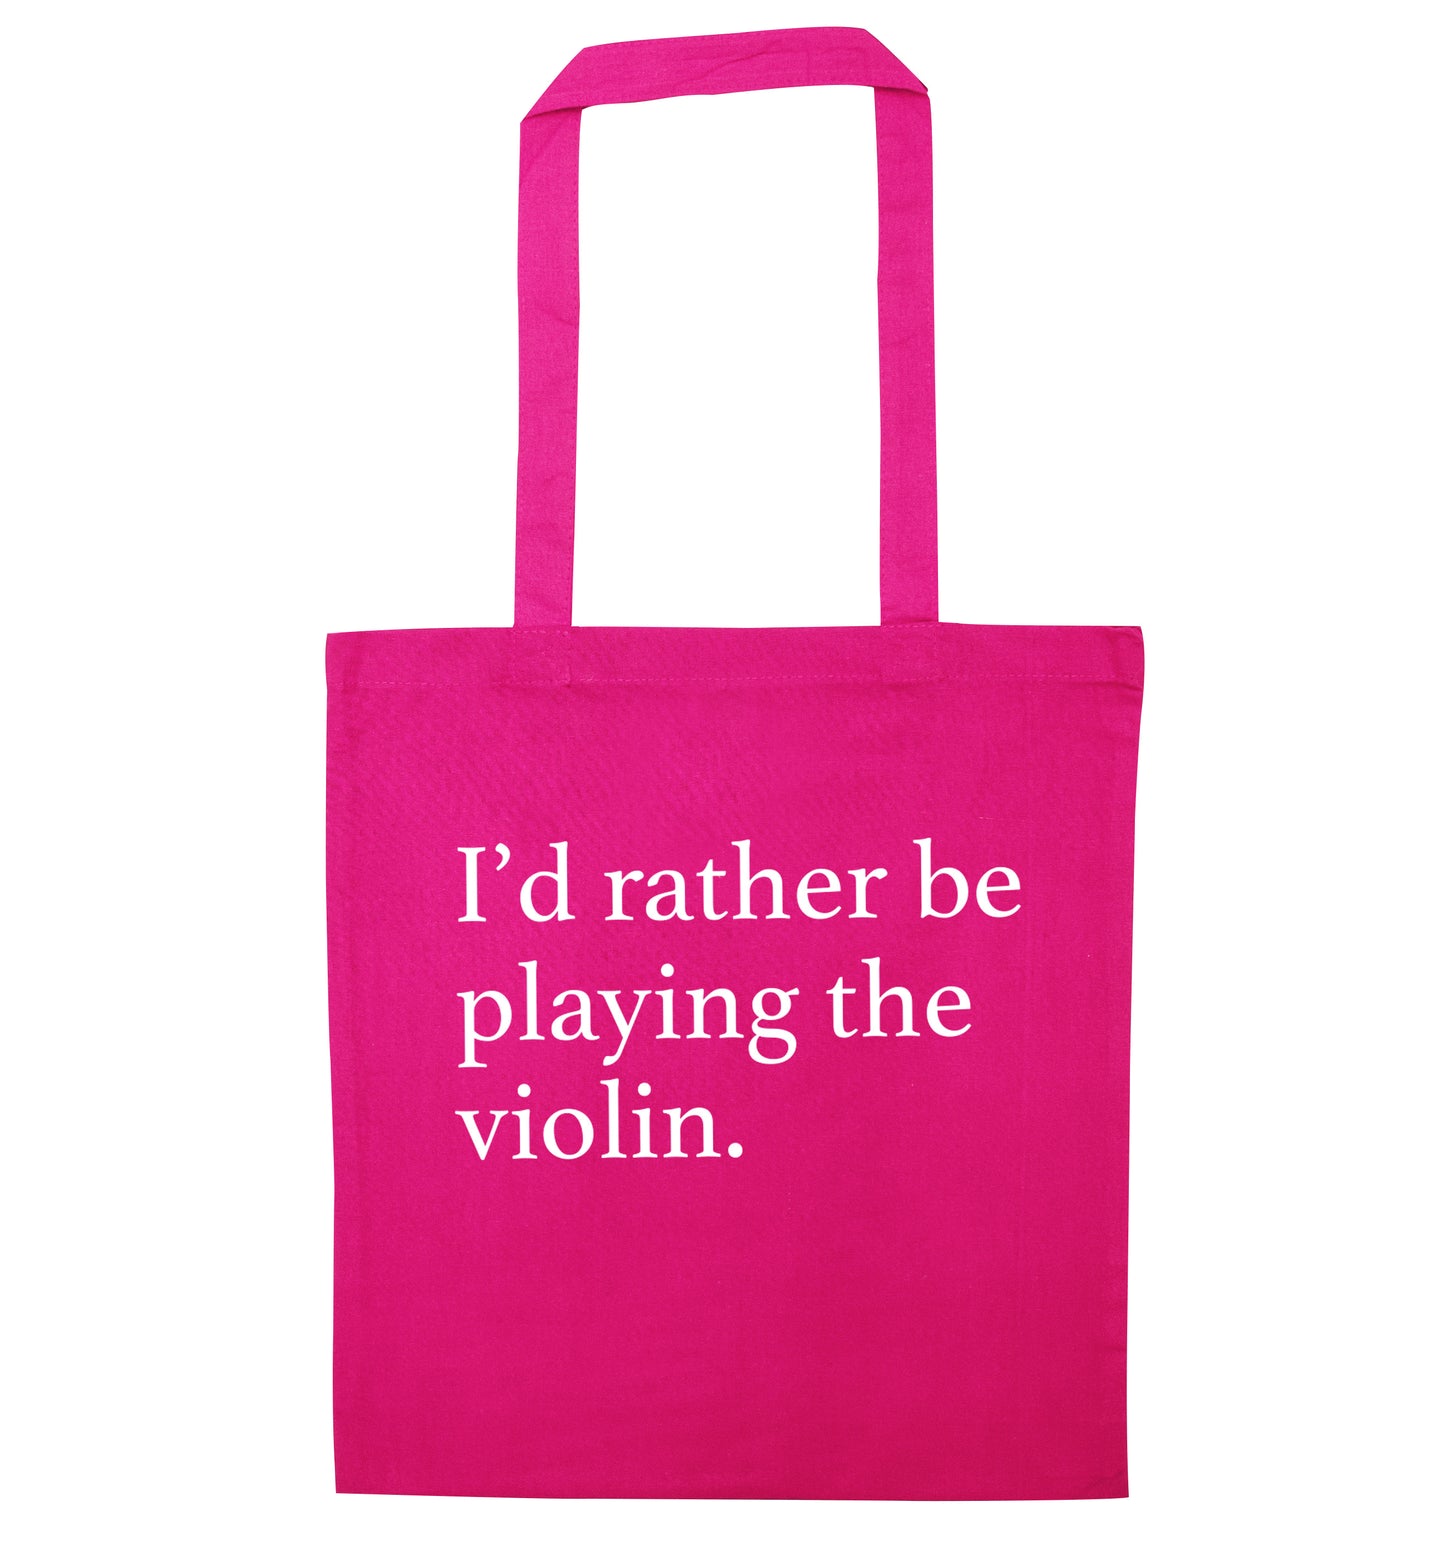 I'd rather be playing the violin pink tote bag